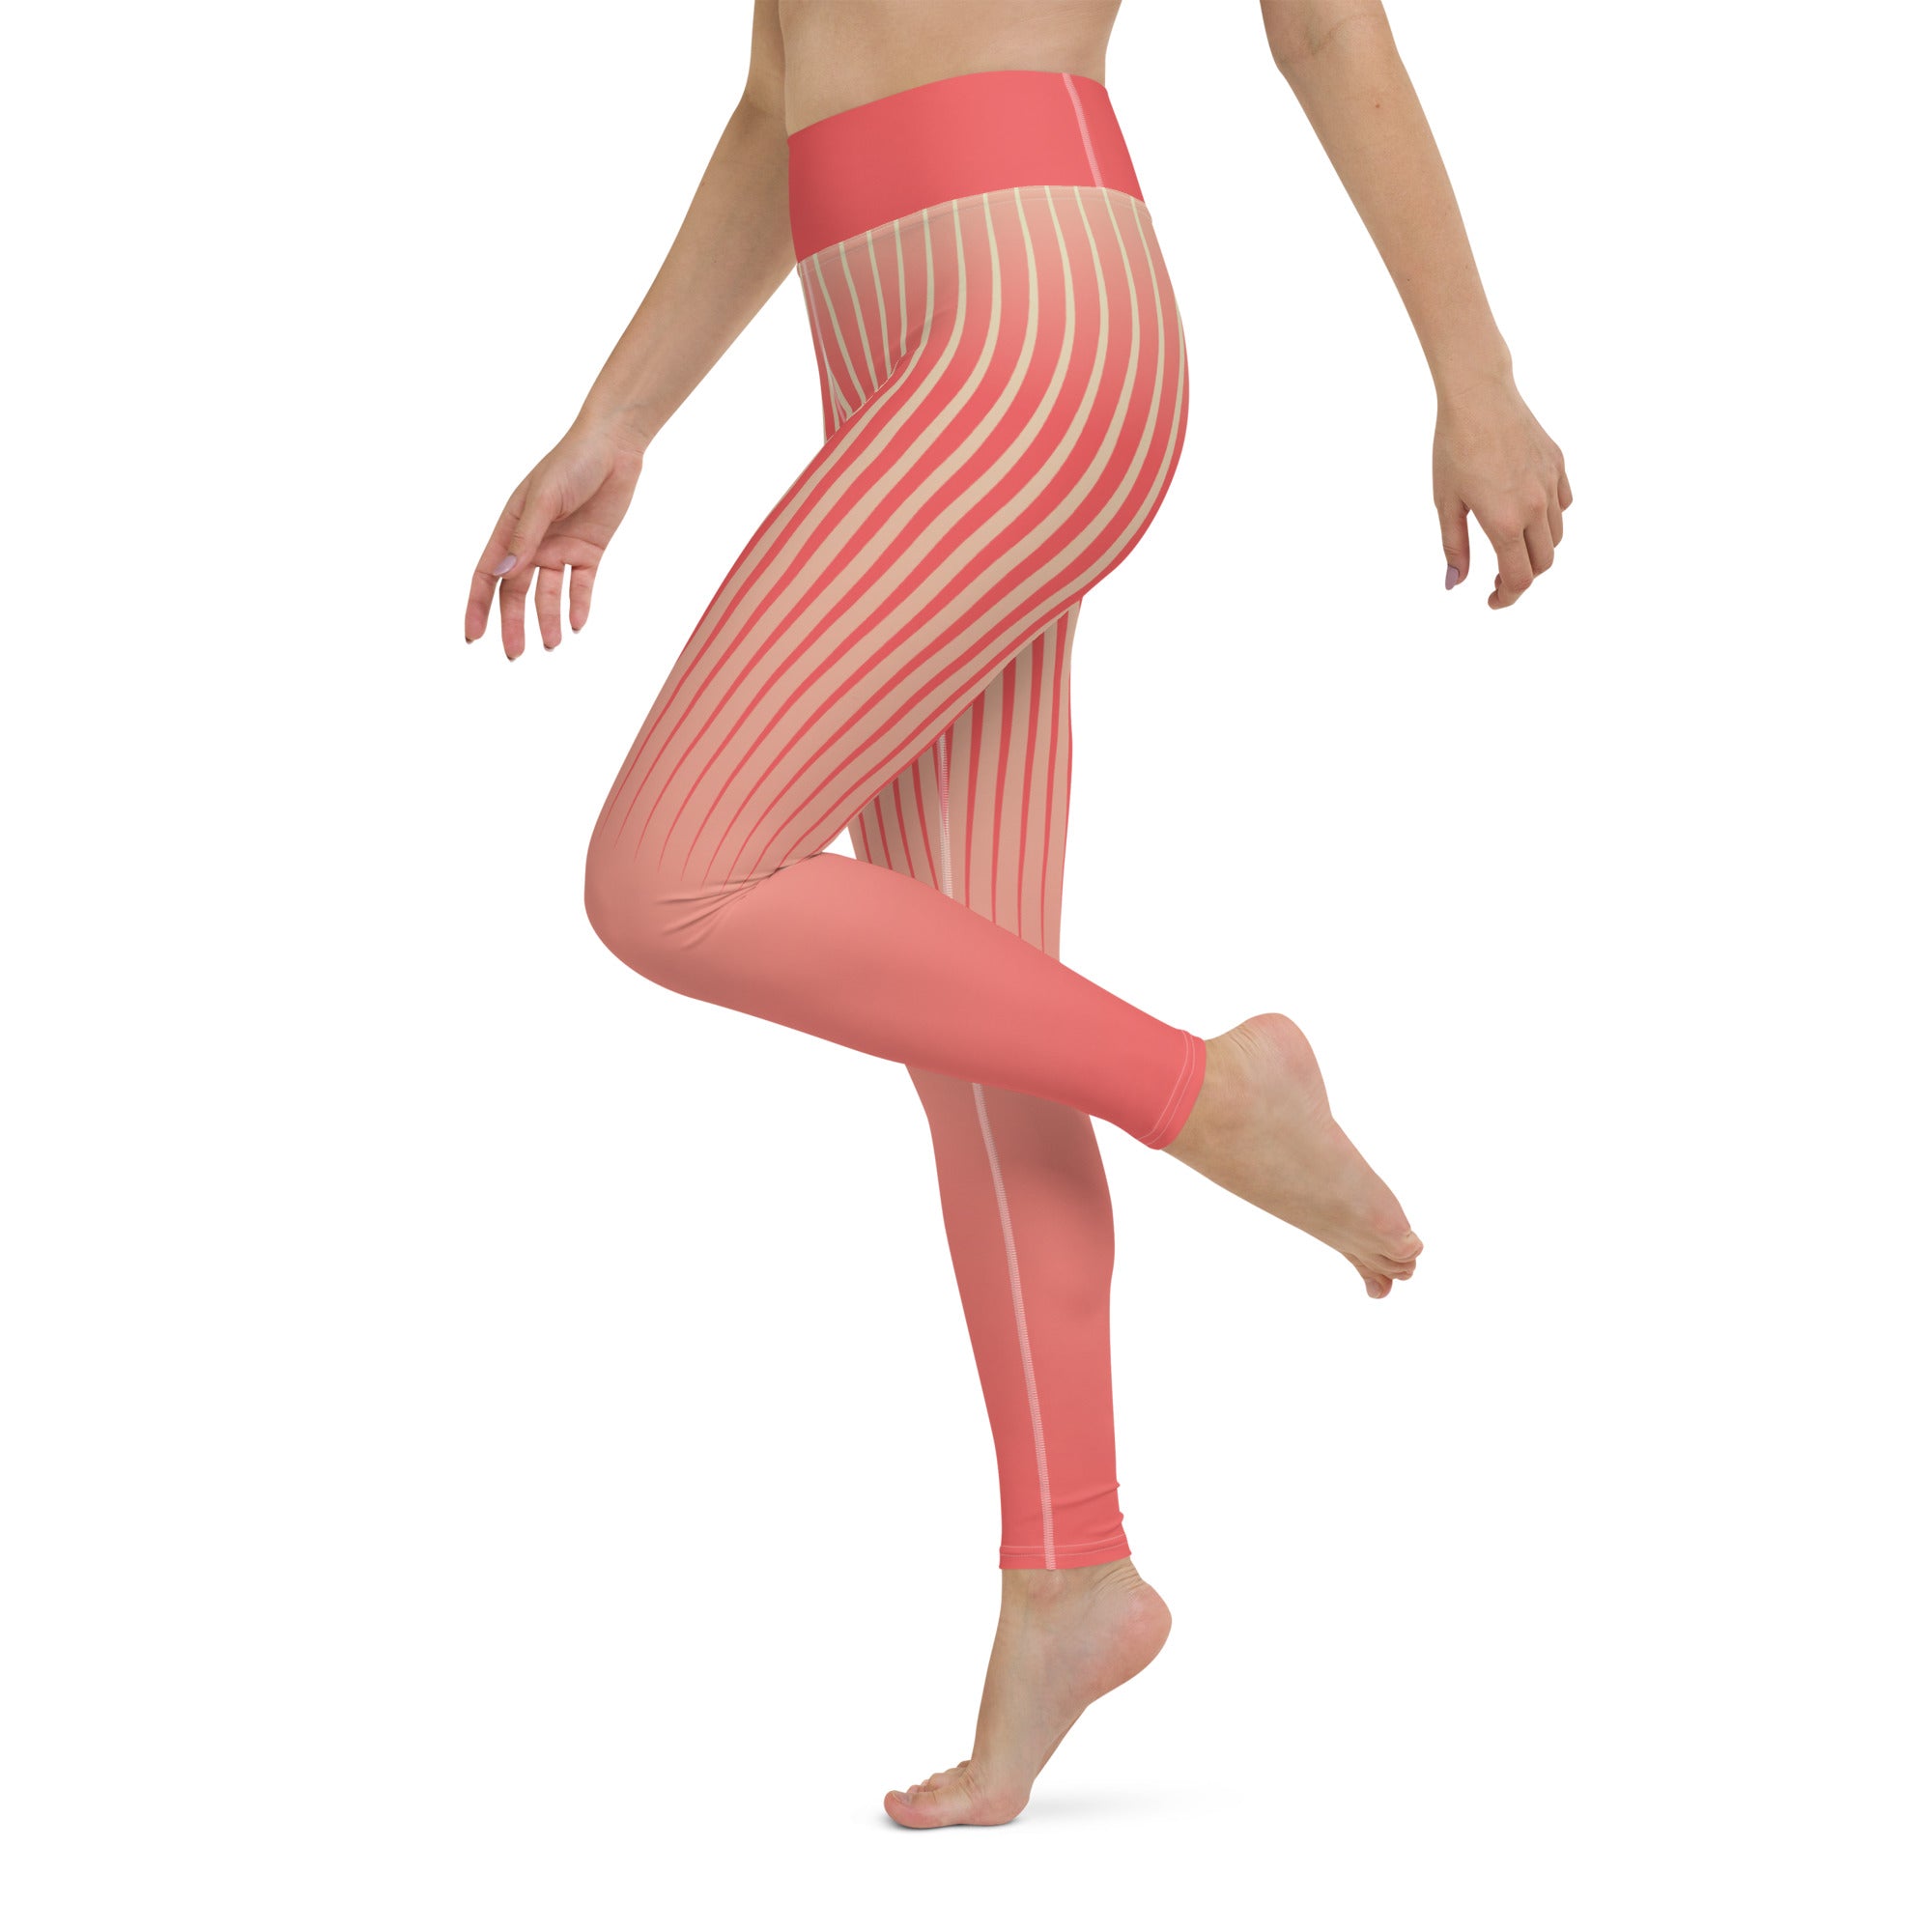 Ocean Breeze Yoga Leggings feature detail on stretch and fit